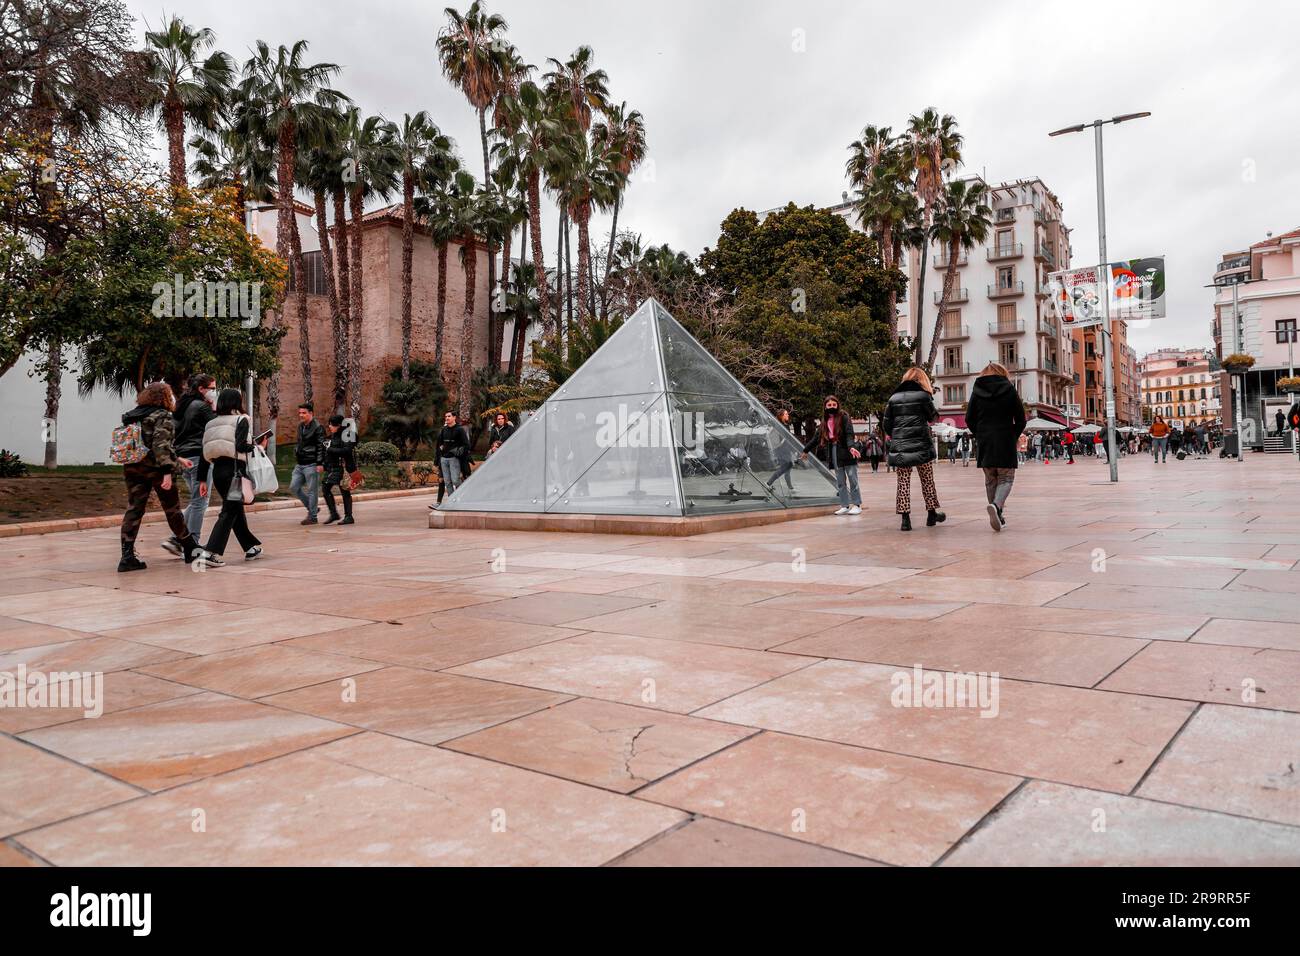 Malaga, Spain - FEB 27, 2022: The Glass Pyramid at the Calle Alcazabilla, a street in the central district of Malaga. Stock Photo